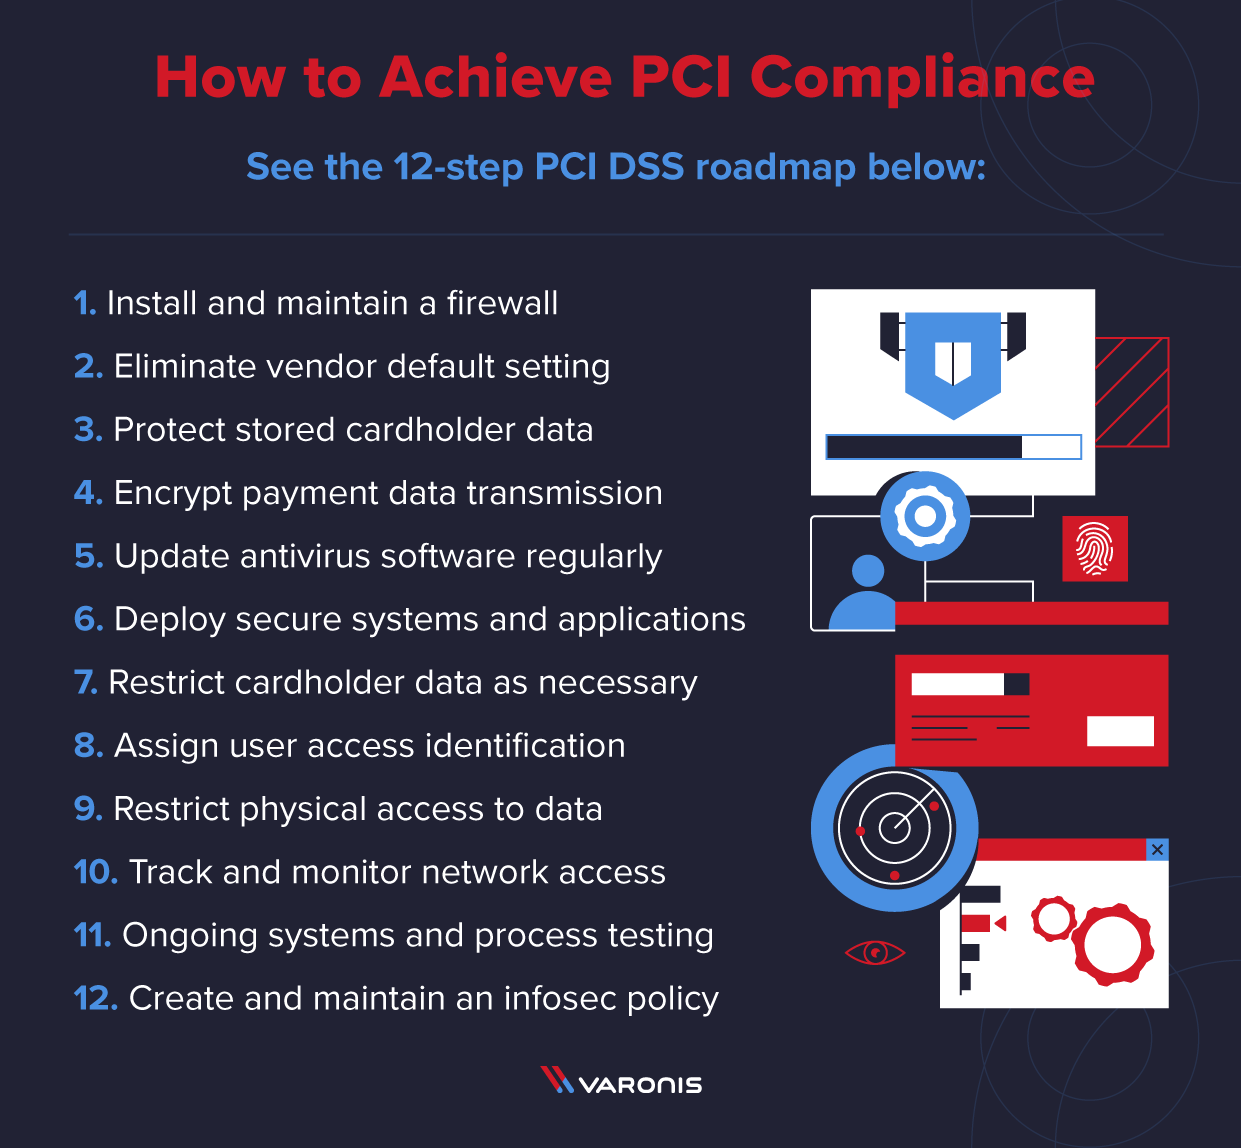 PCI requirements